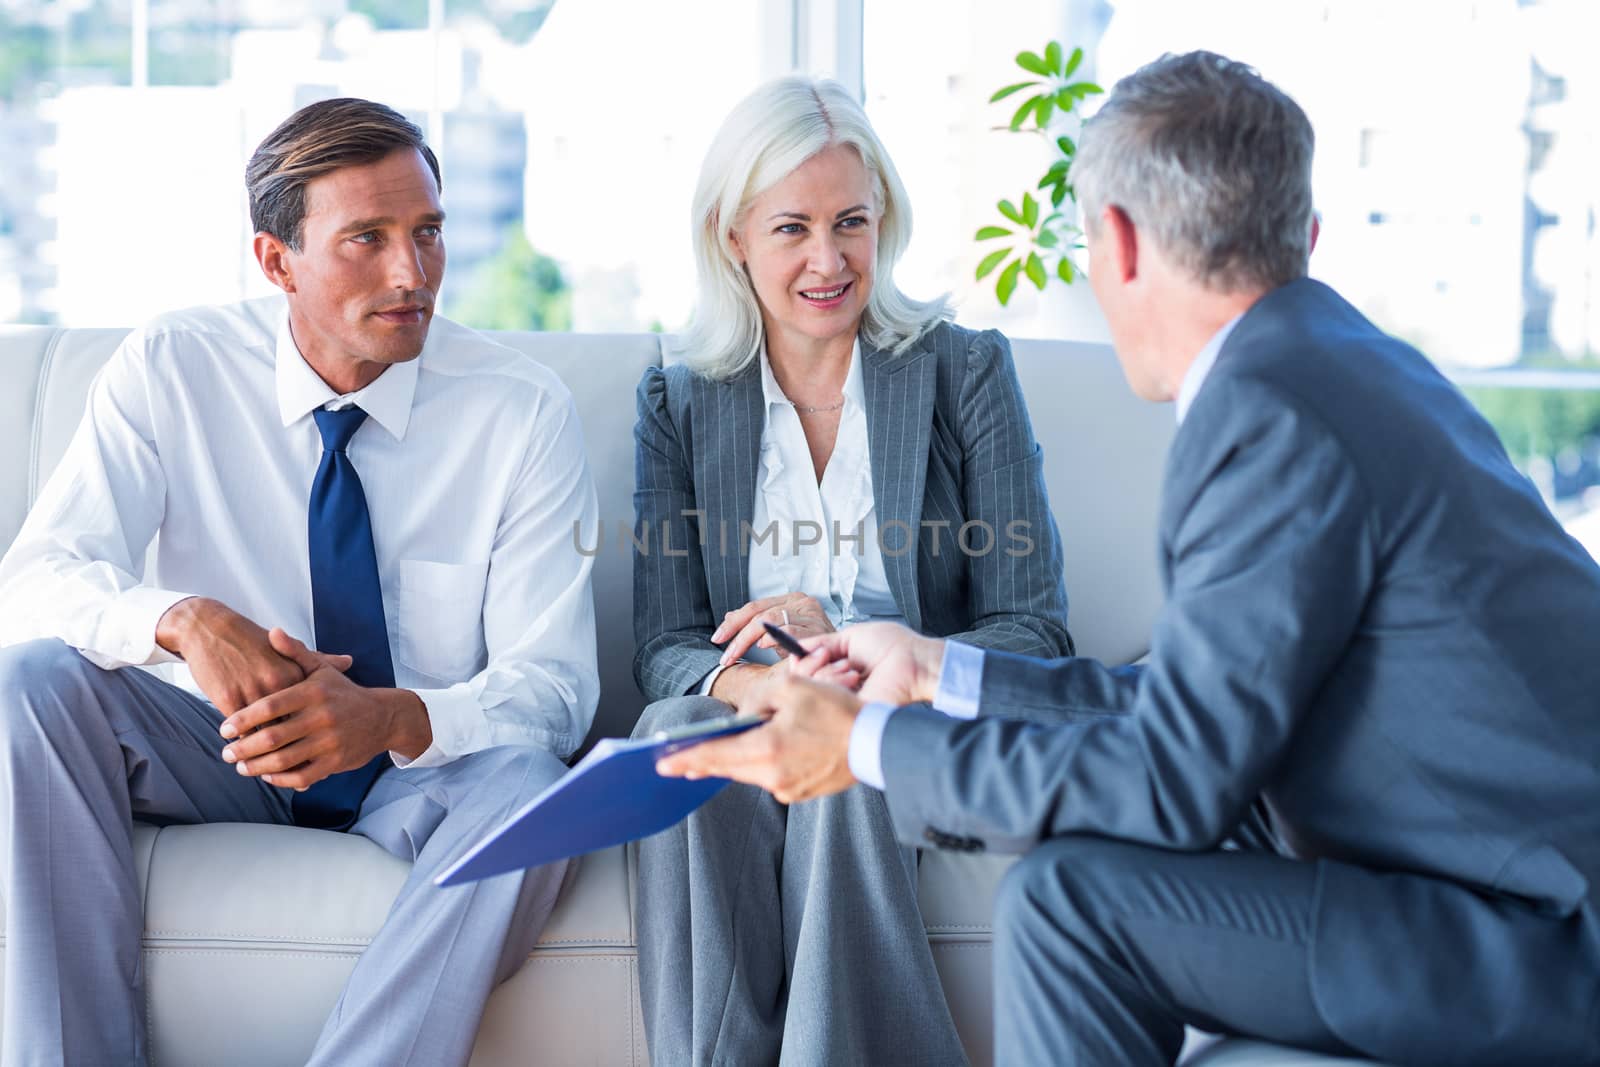 Business people speaking together on couch  by Wavebreakmedia